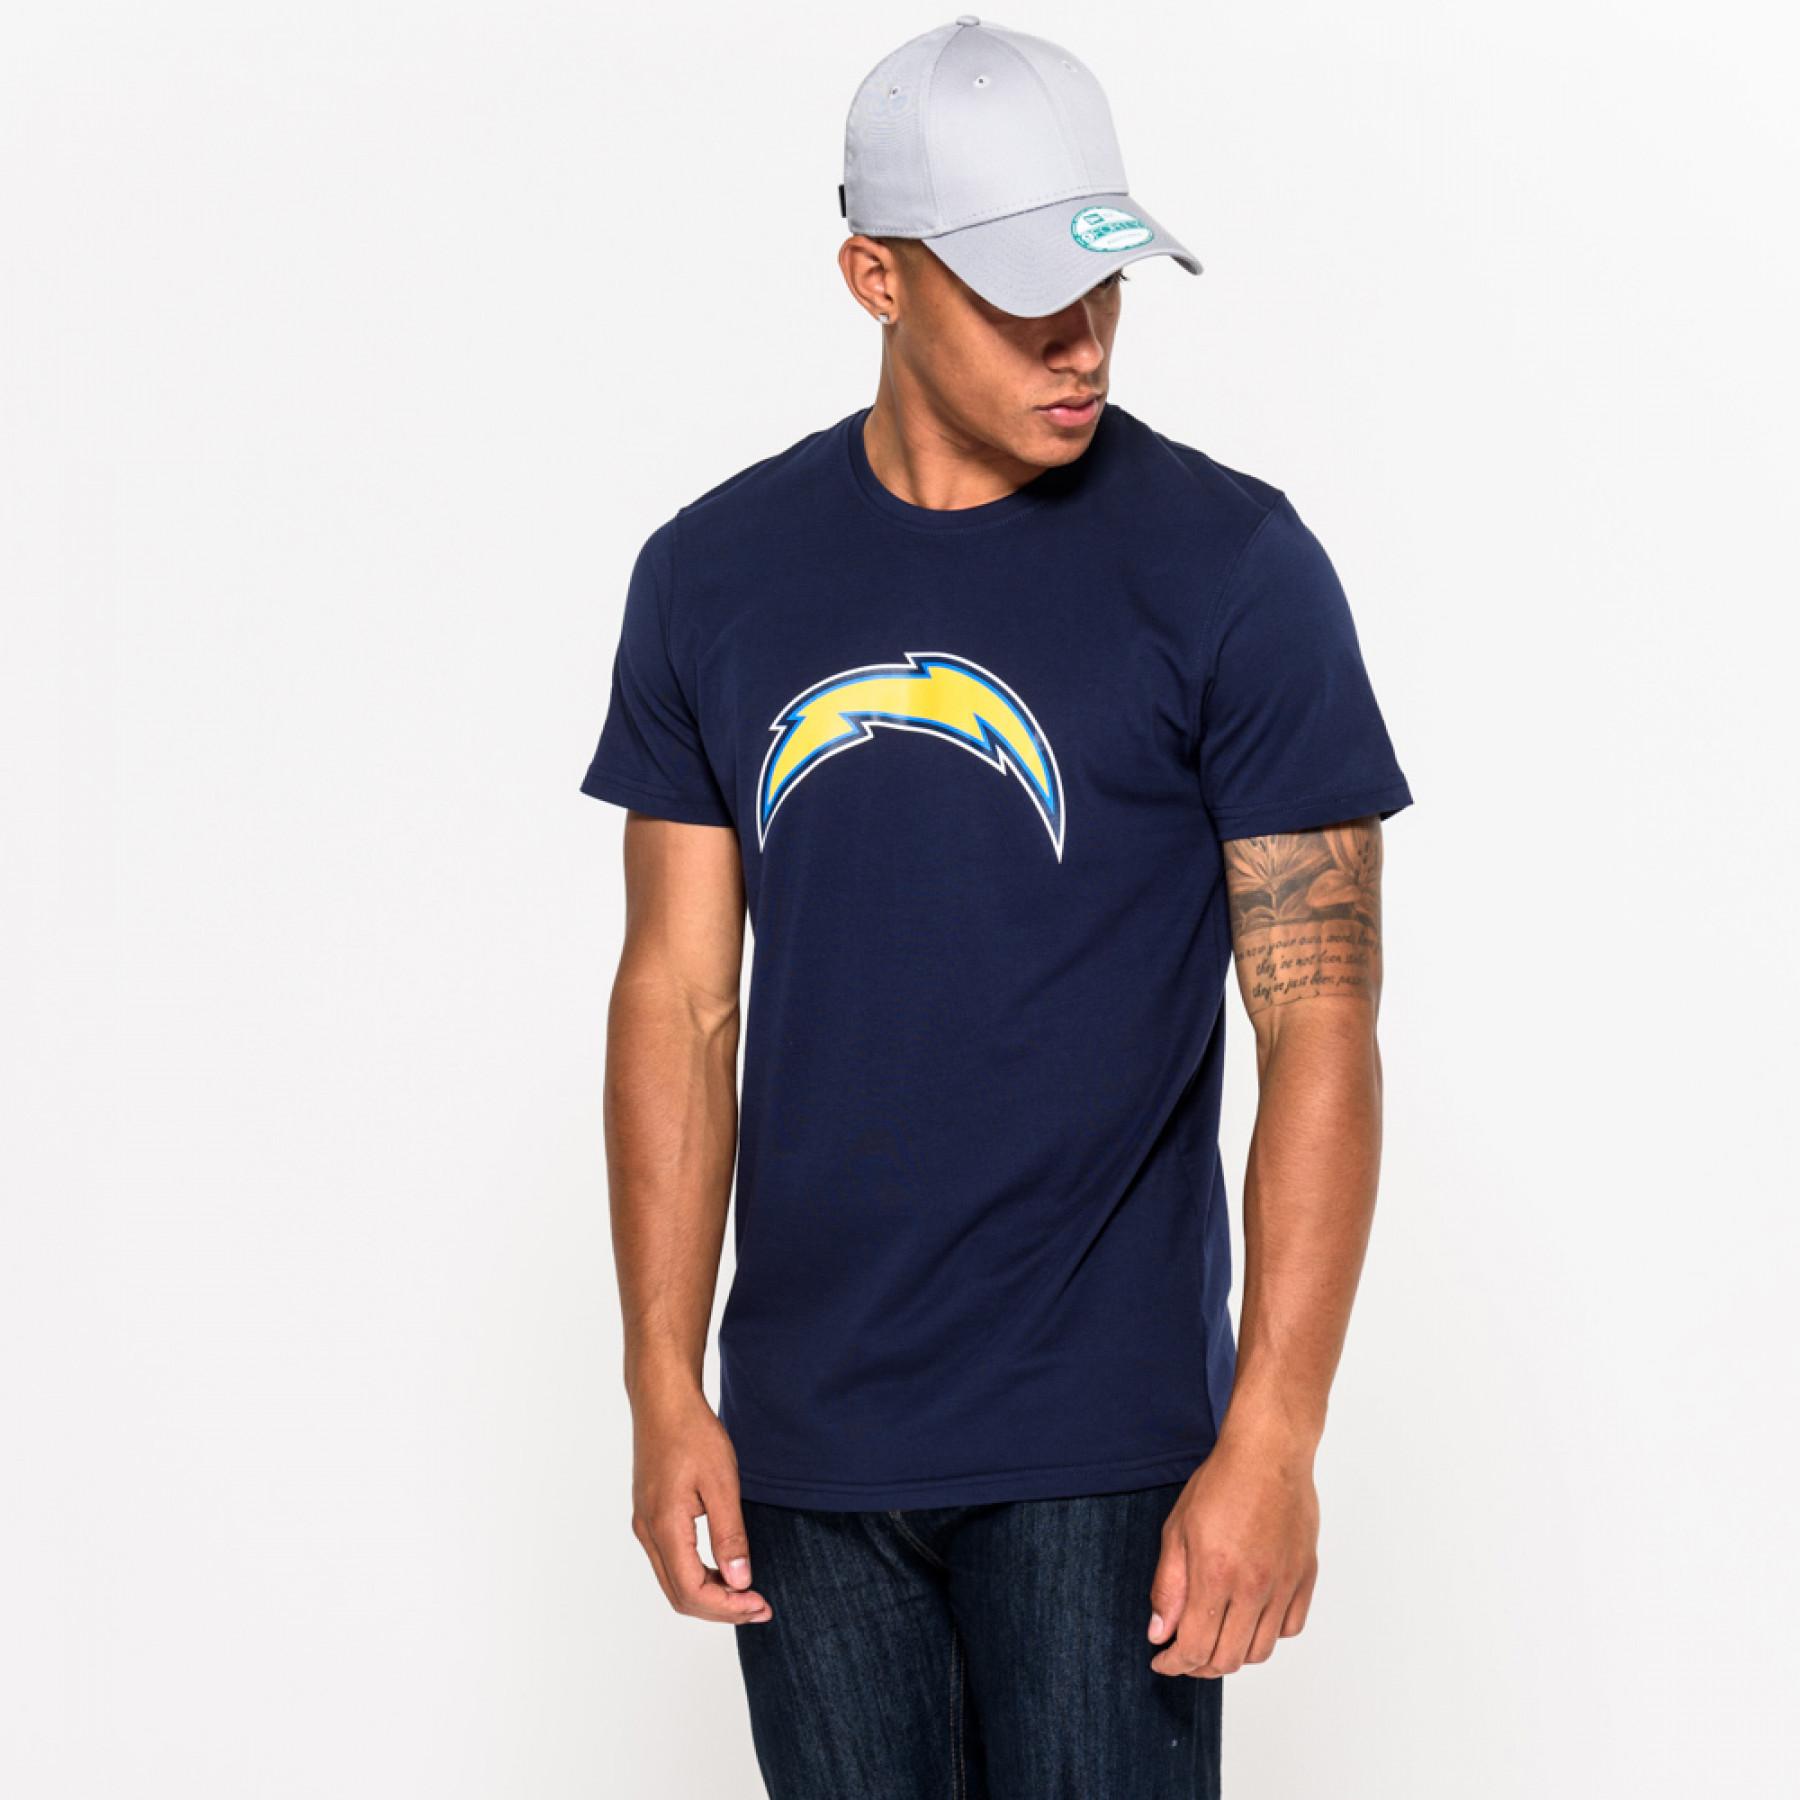  New EraT - s h i r t   logo San Diego Chargers